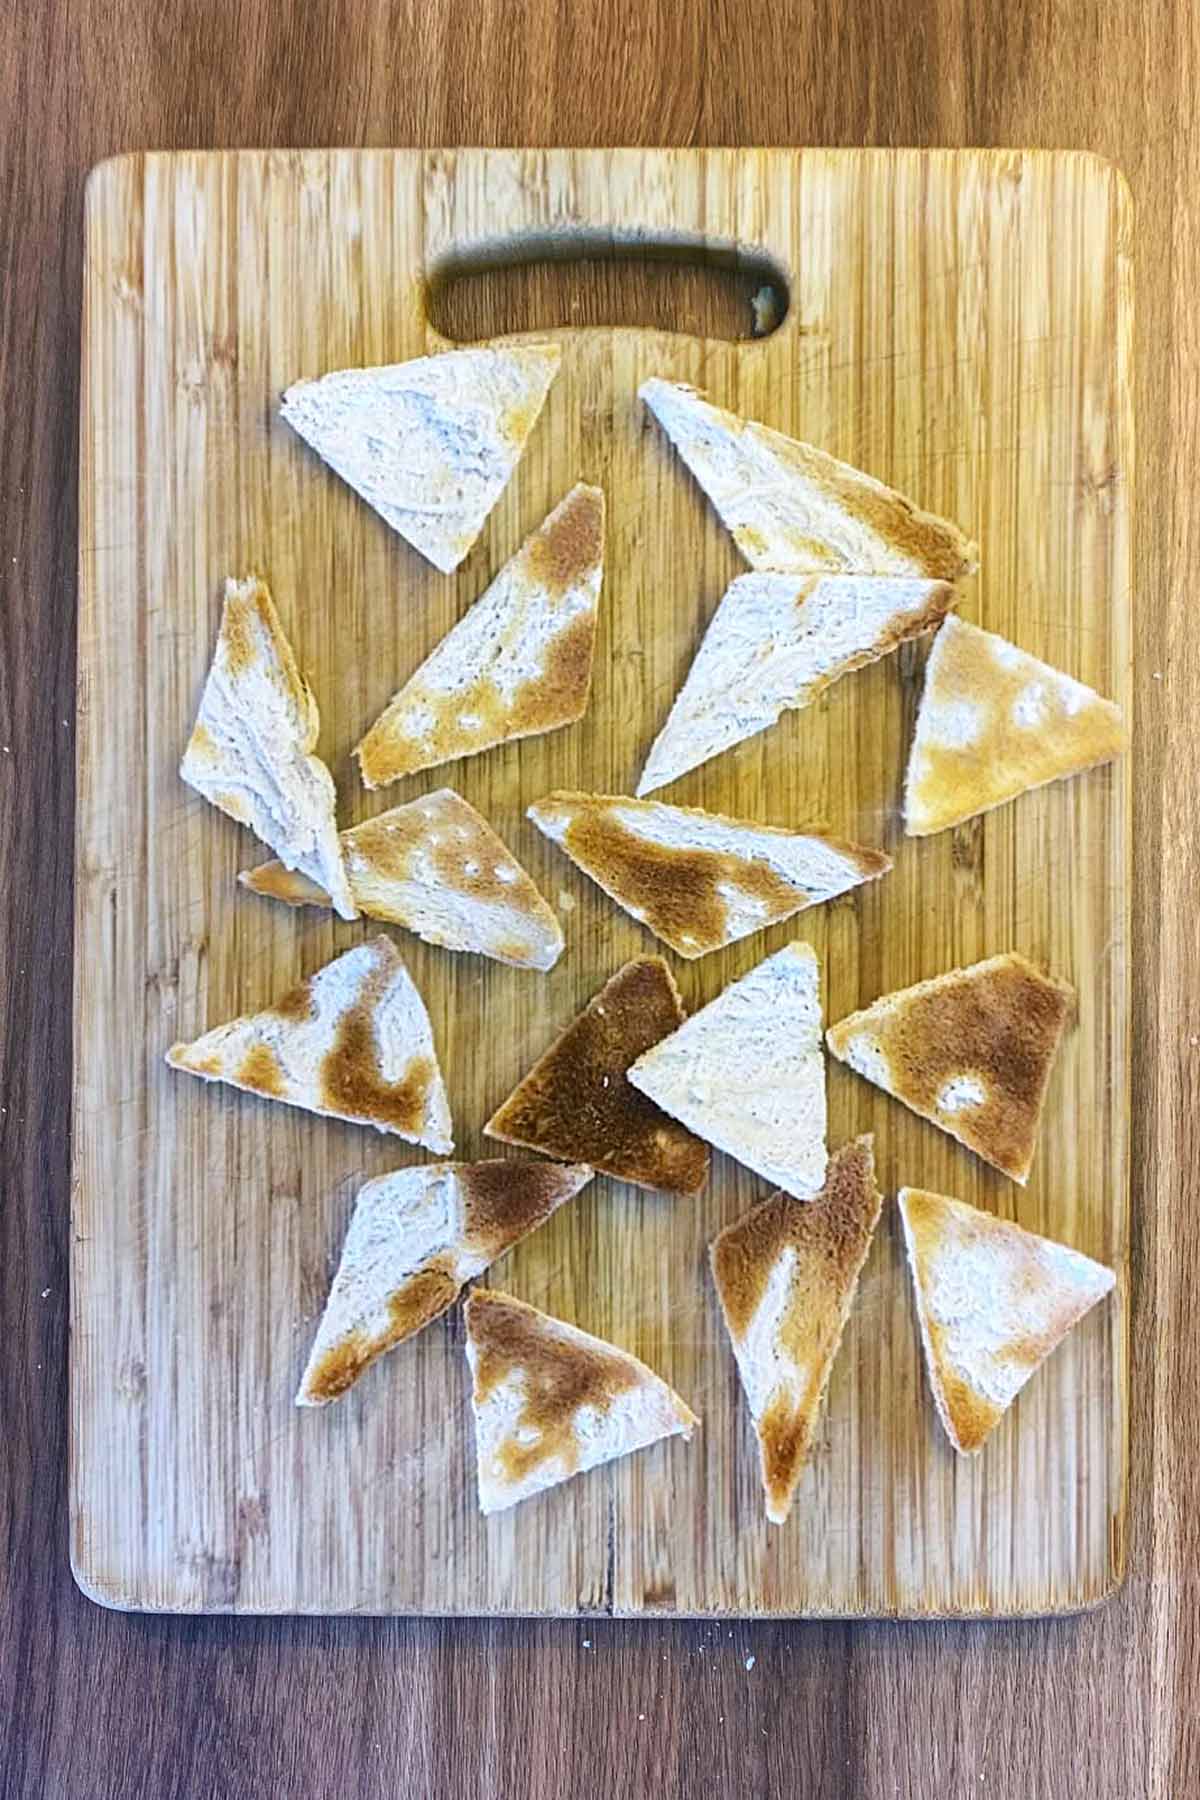 The triangles toasted.